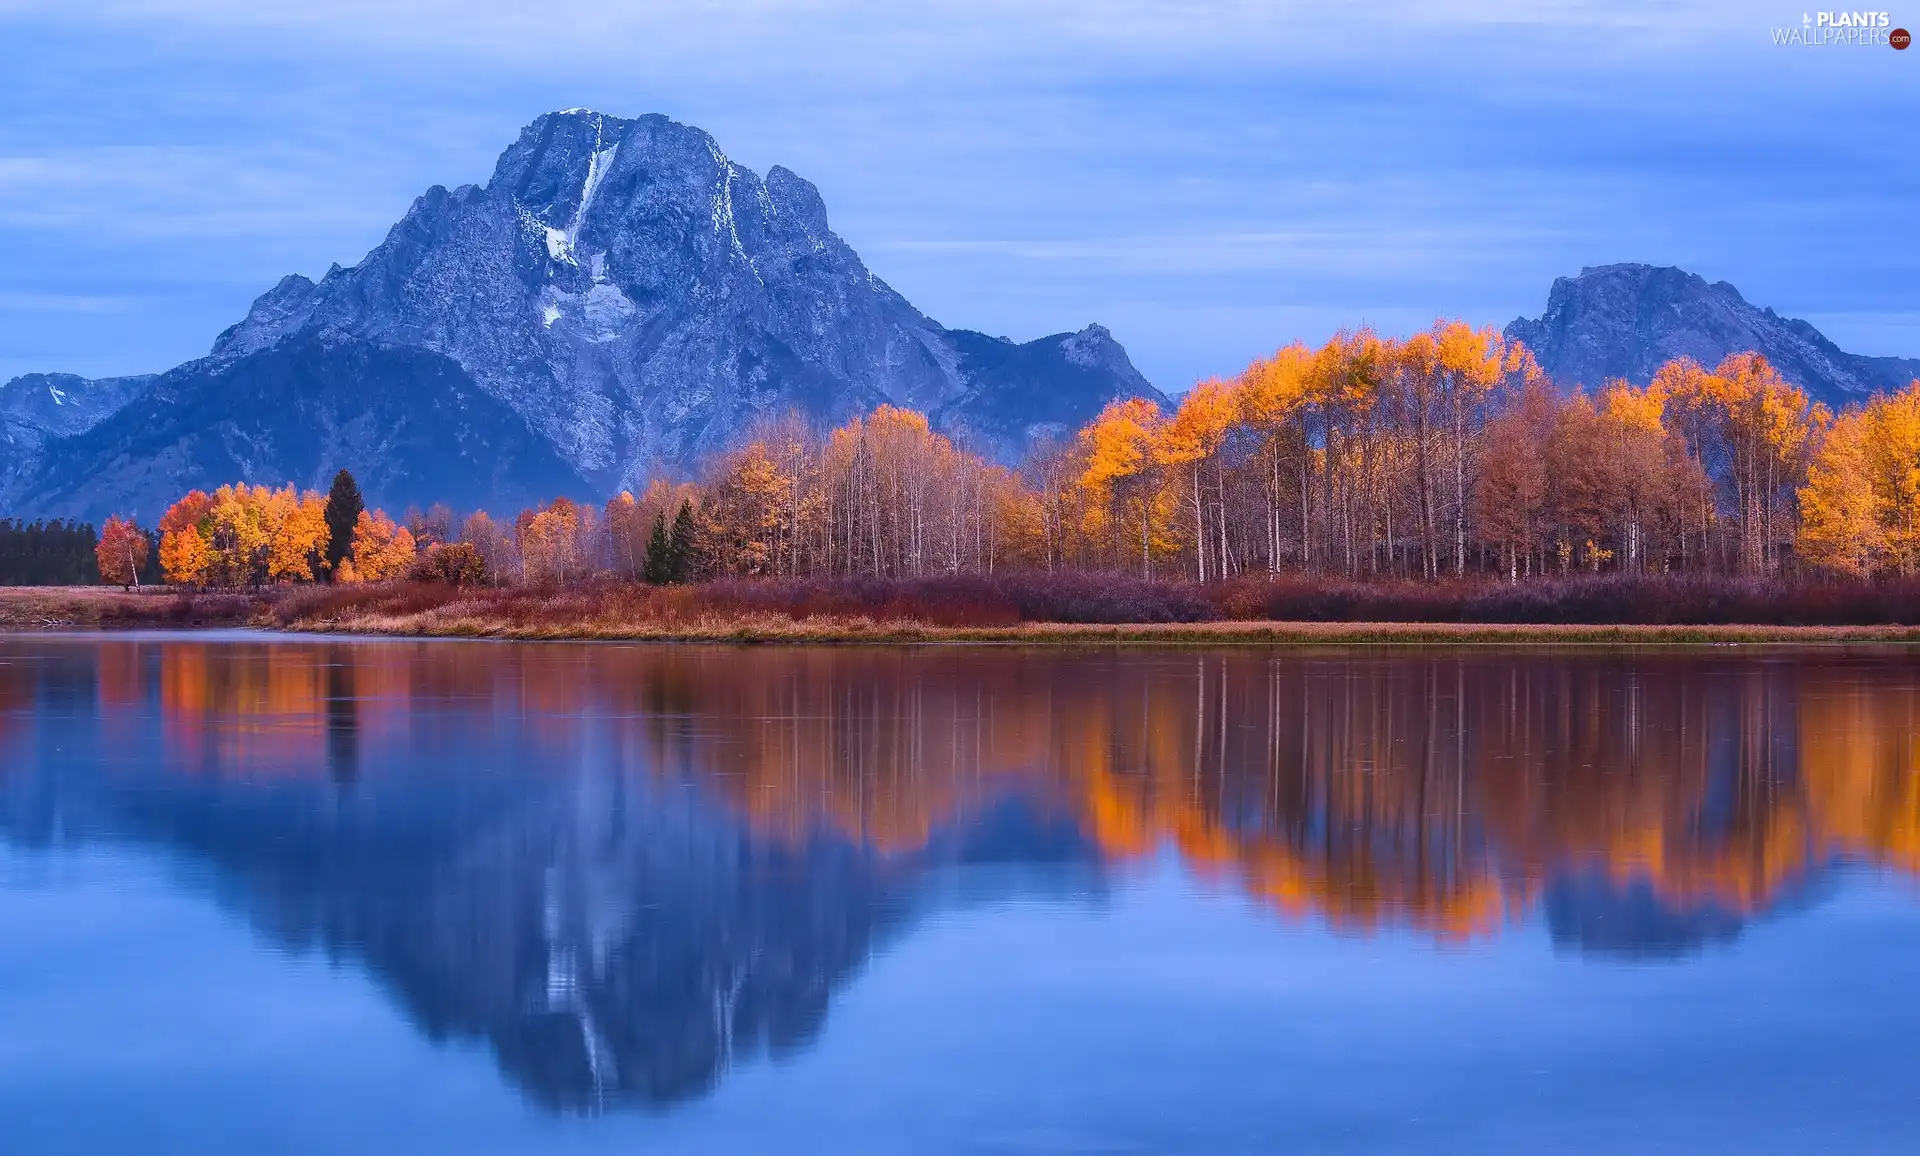 State of Wyoming, The United States, Grand Teton National Park, Snake River, viewes, autumn, Mount Moran, trees, Mountains